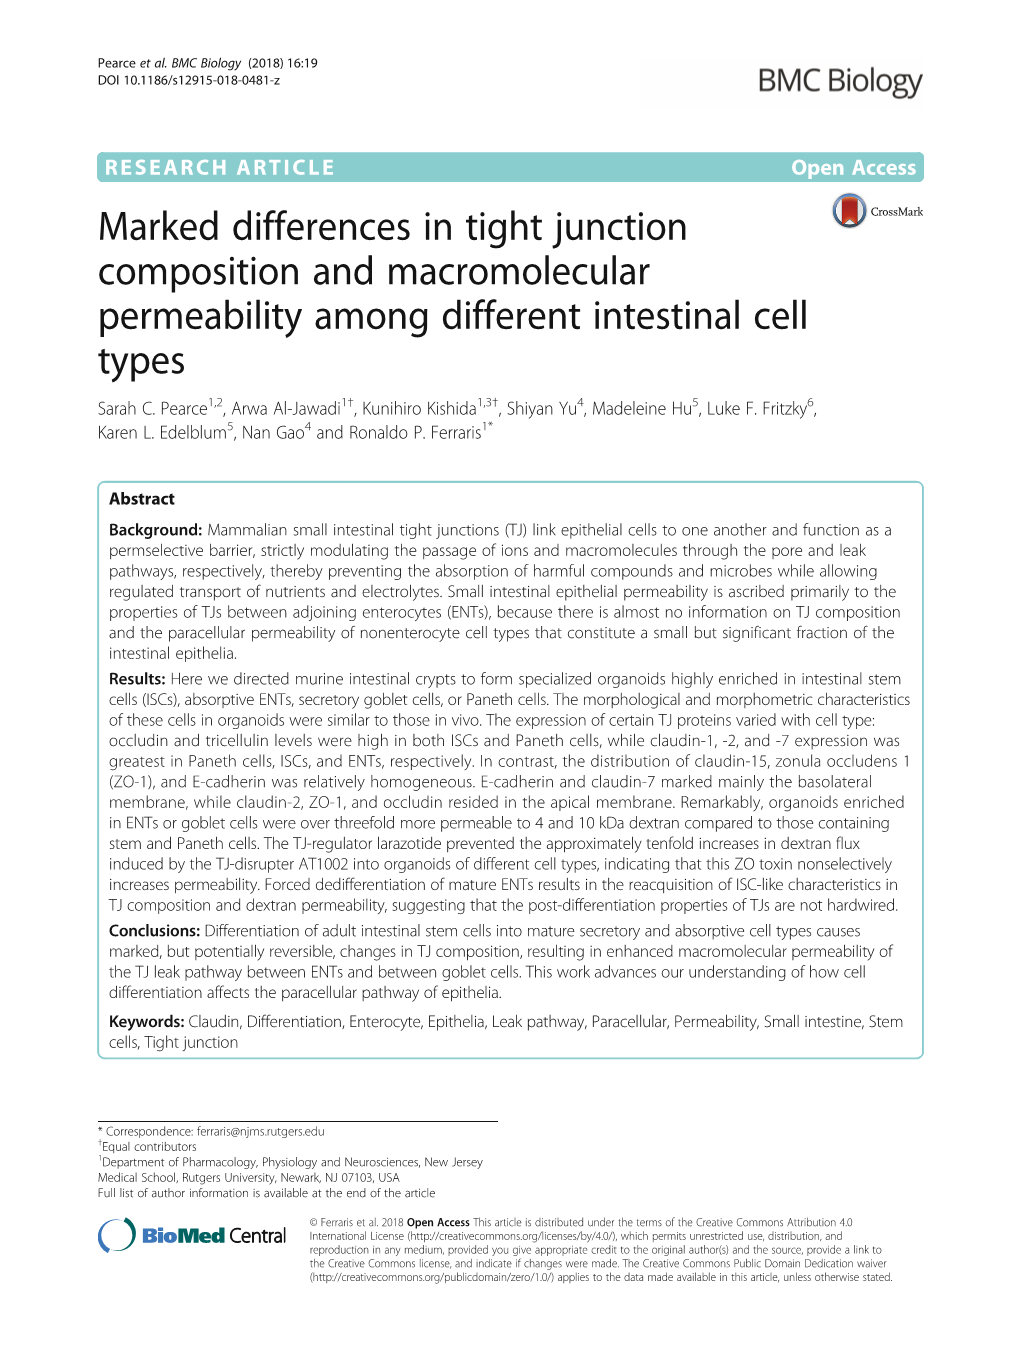 Marked Differences in Tight Junction Composition and Macromolecular Permeability Among Different Intestinal Cell Types Sarah C